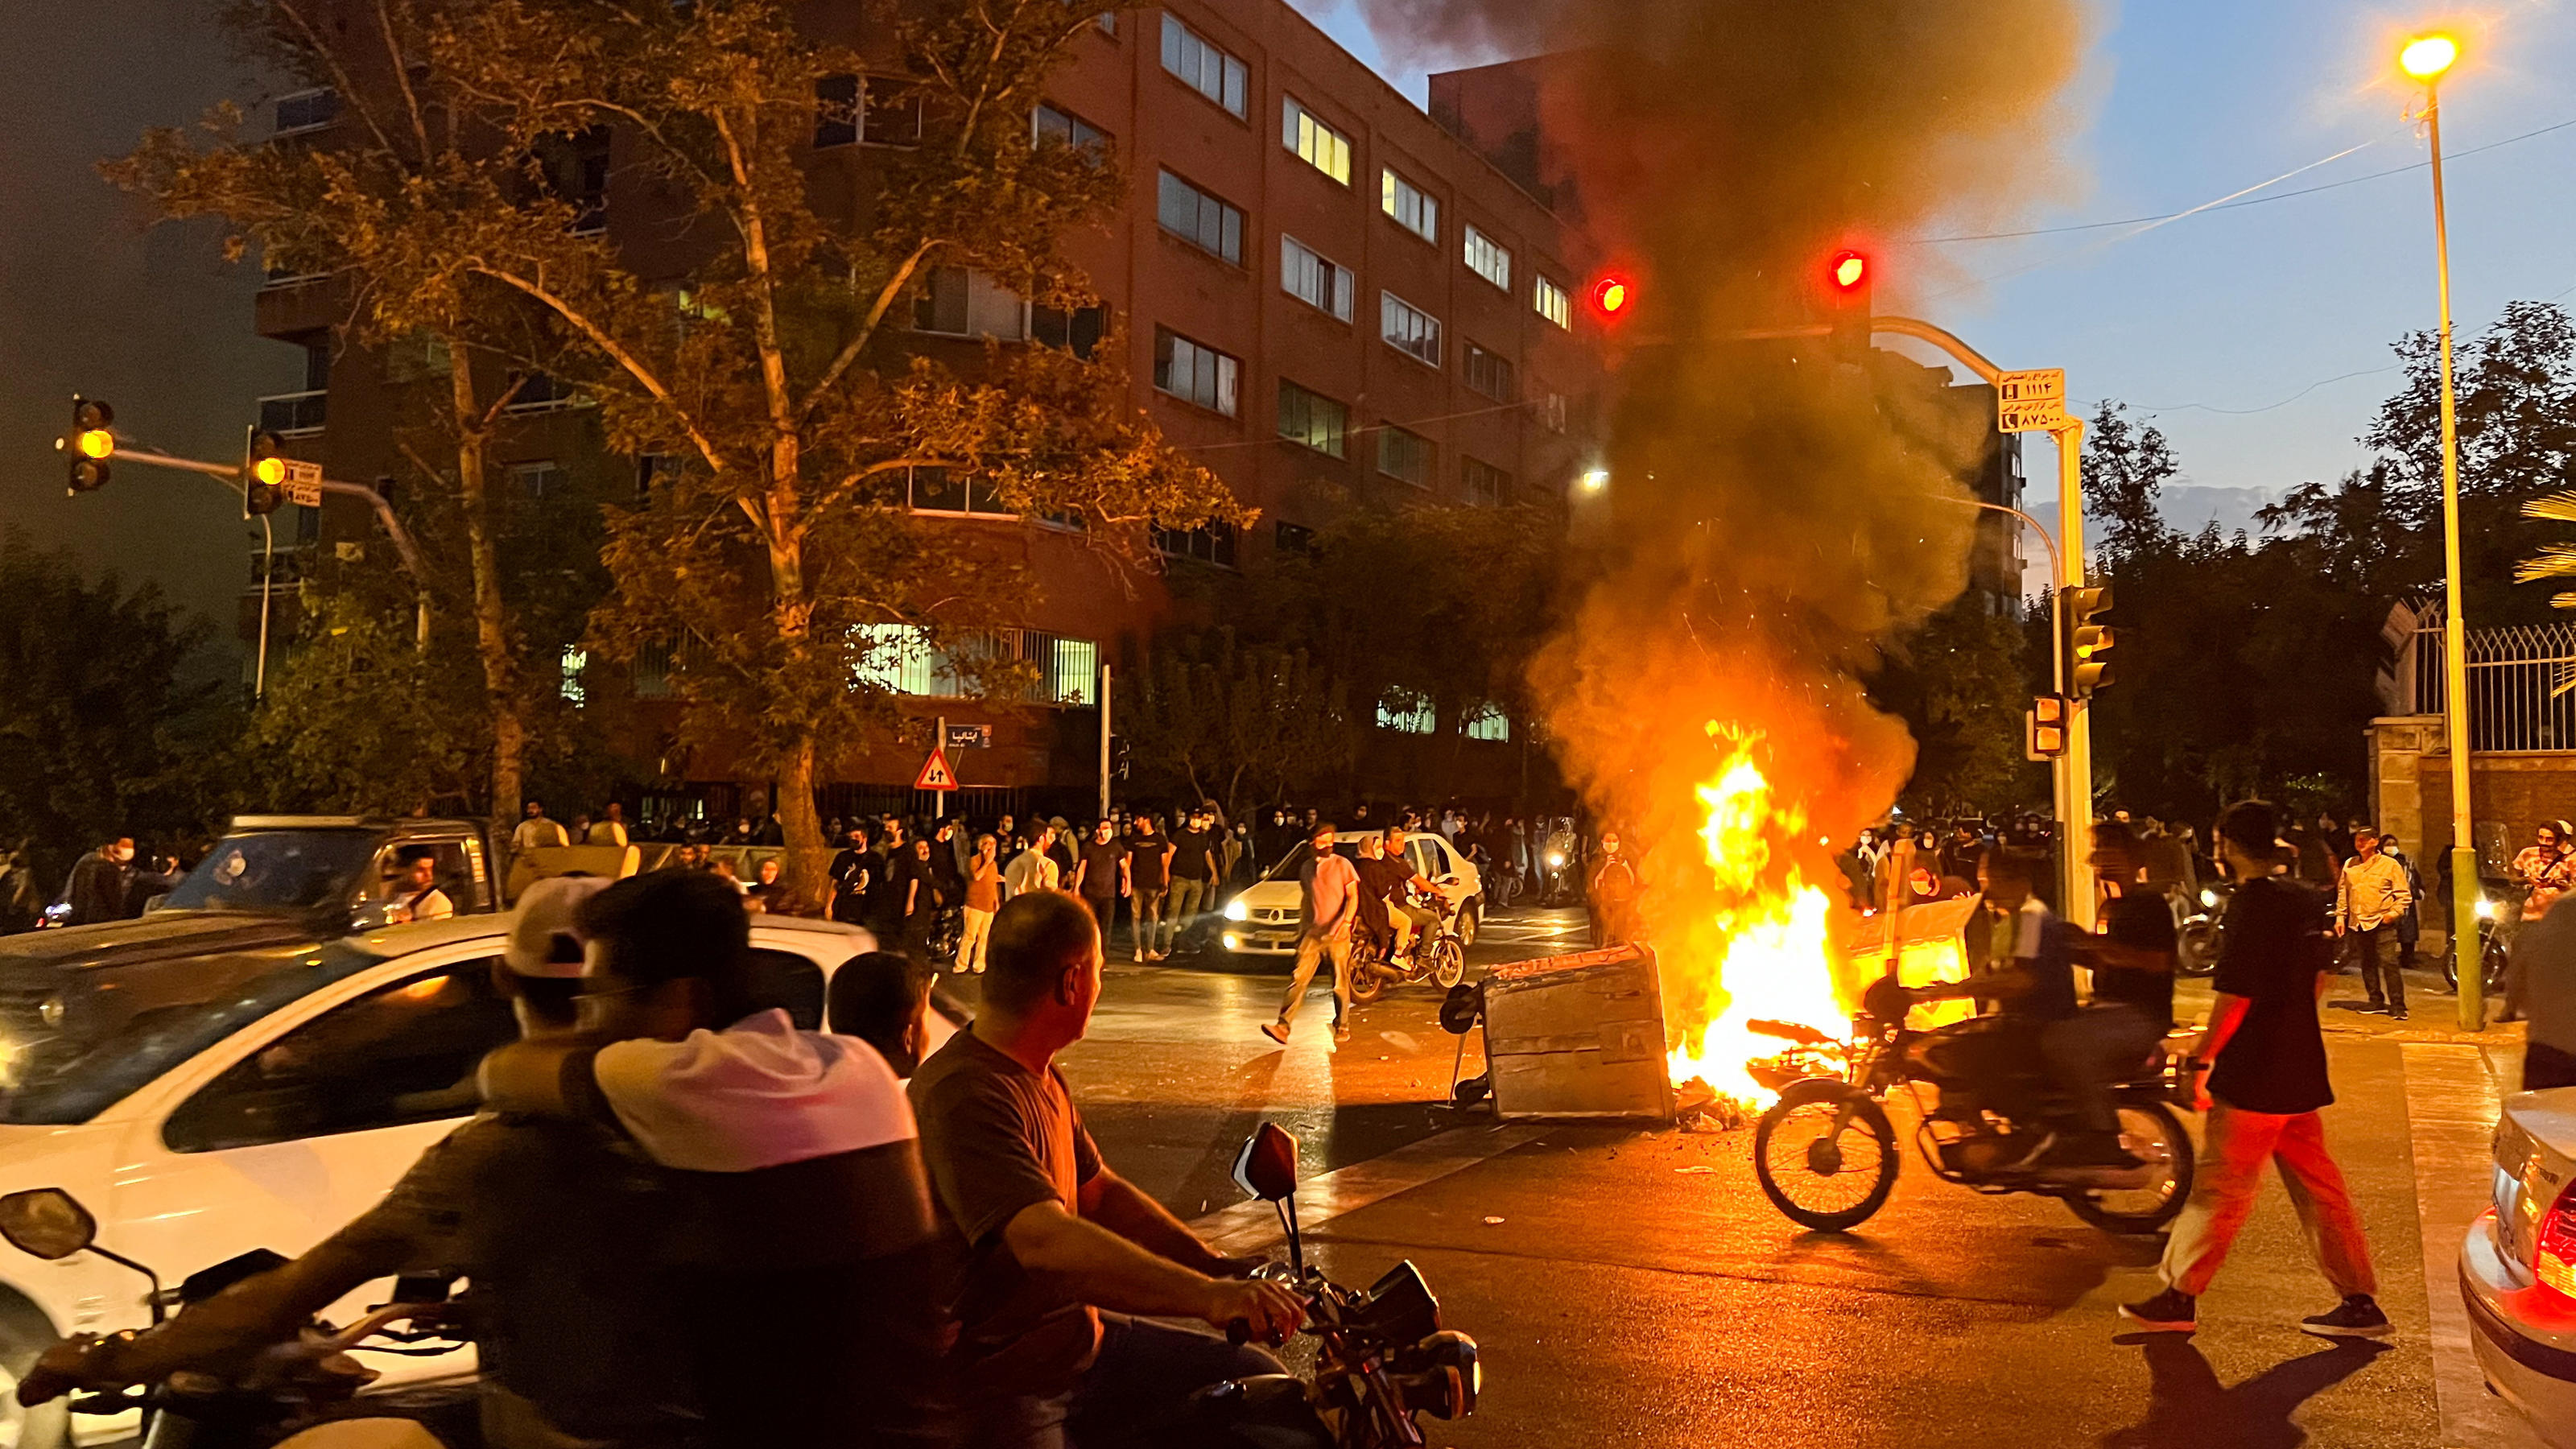 A police motorcycle burns during a protest over the death of Mahsa Amini, a woman who died after being arrested by the Islamic republic's morality police, in Tehran, Iran September 19, 2022. WANA (West Asia News Agency) via REUTERS ATTENTION EDITORS 